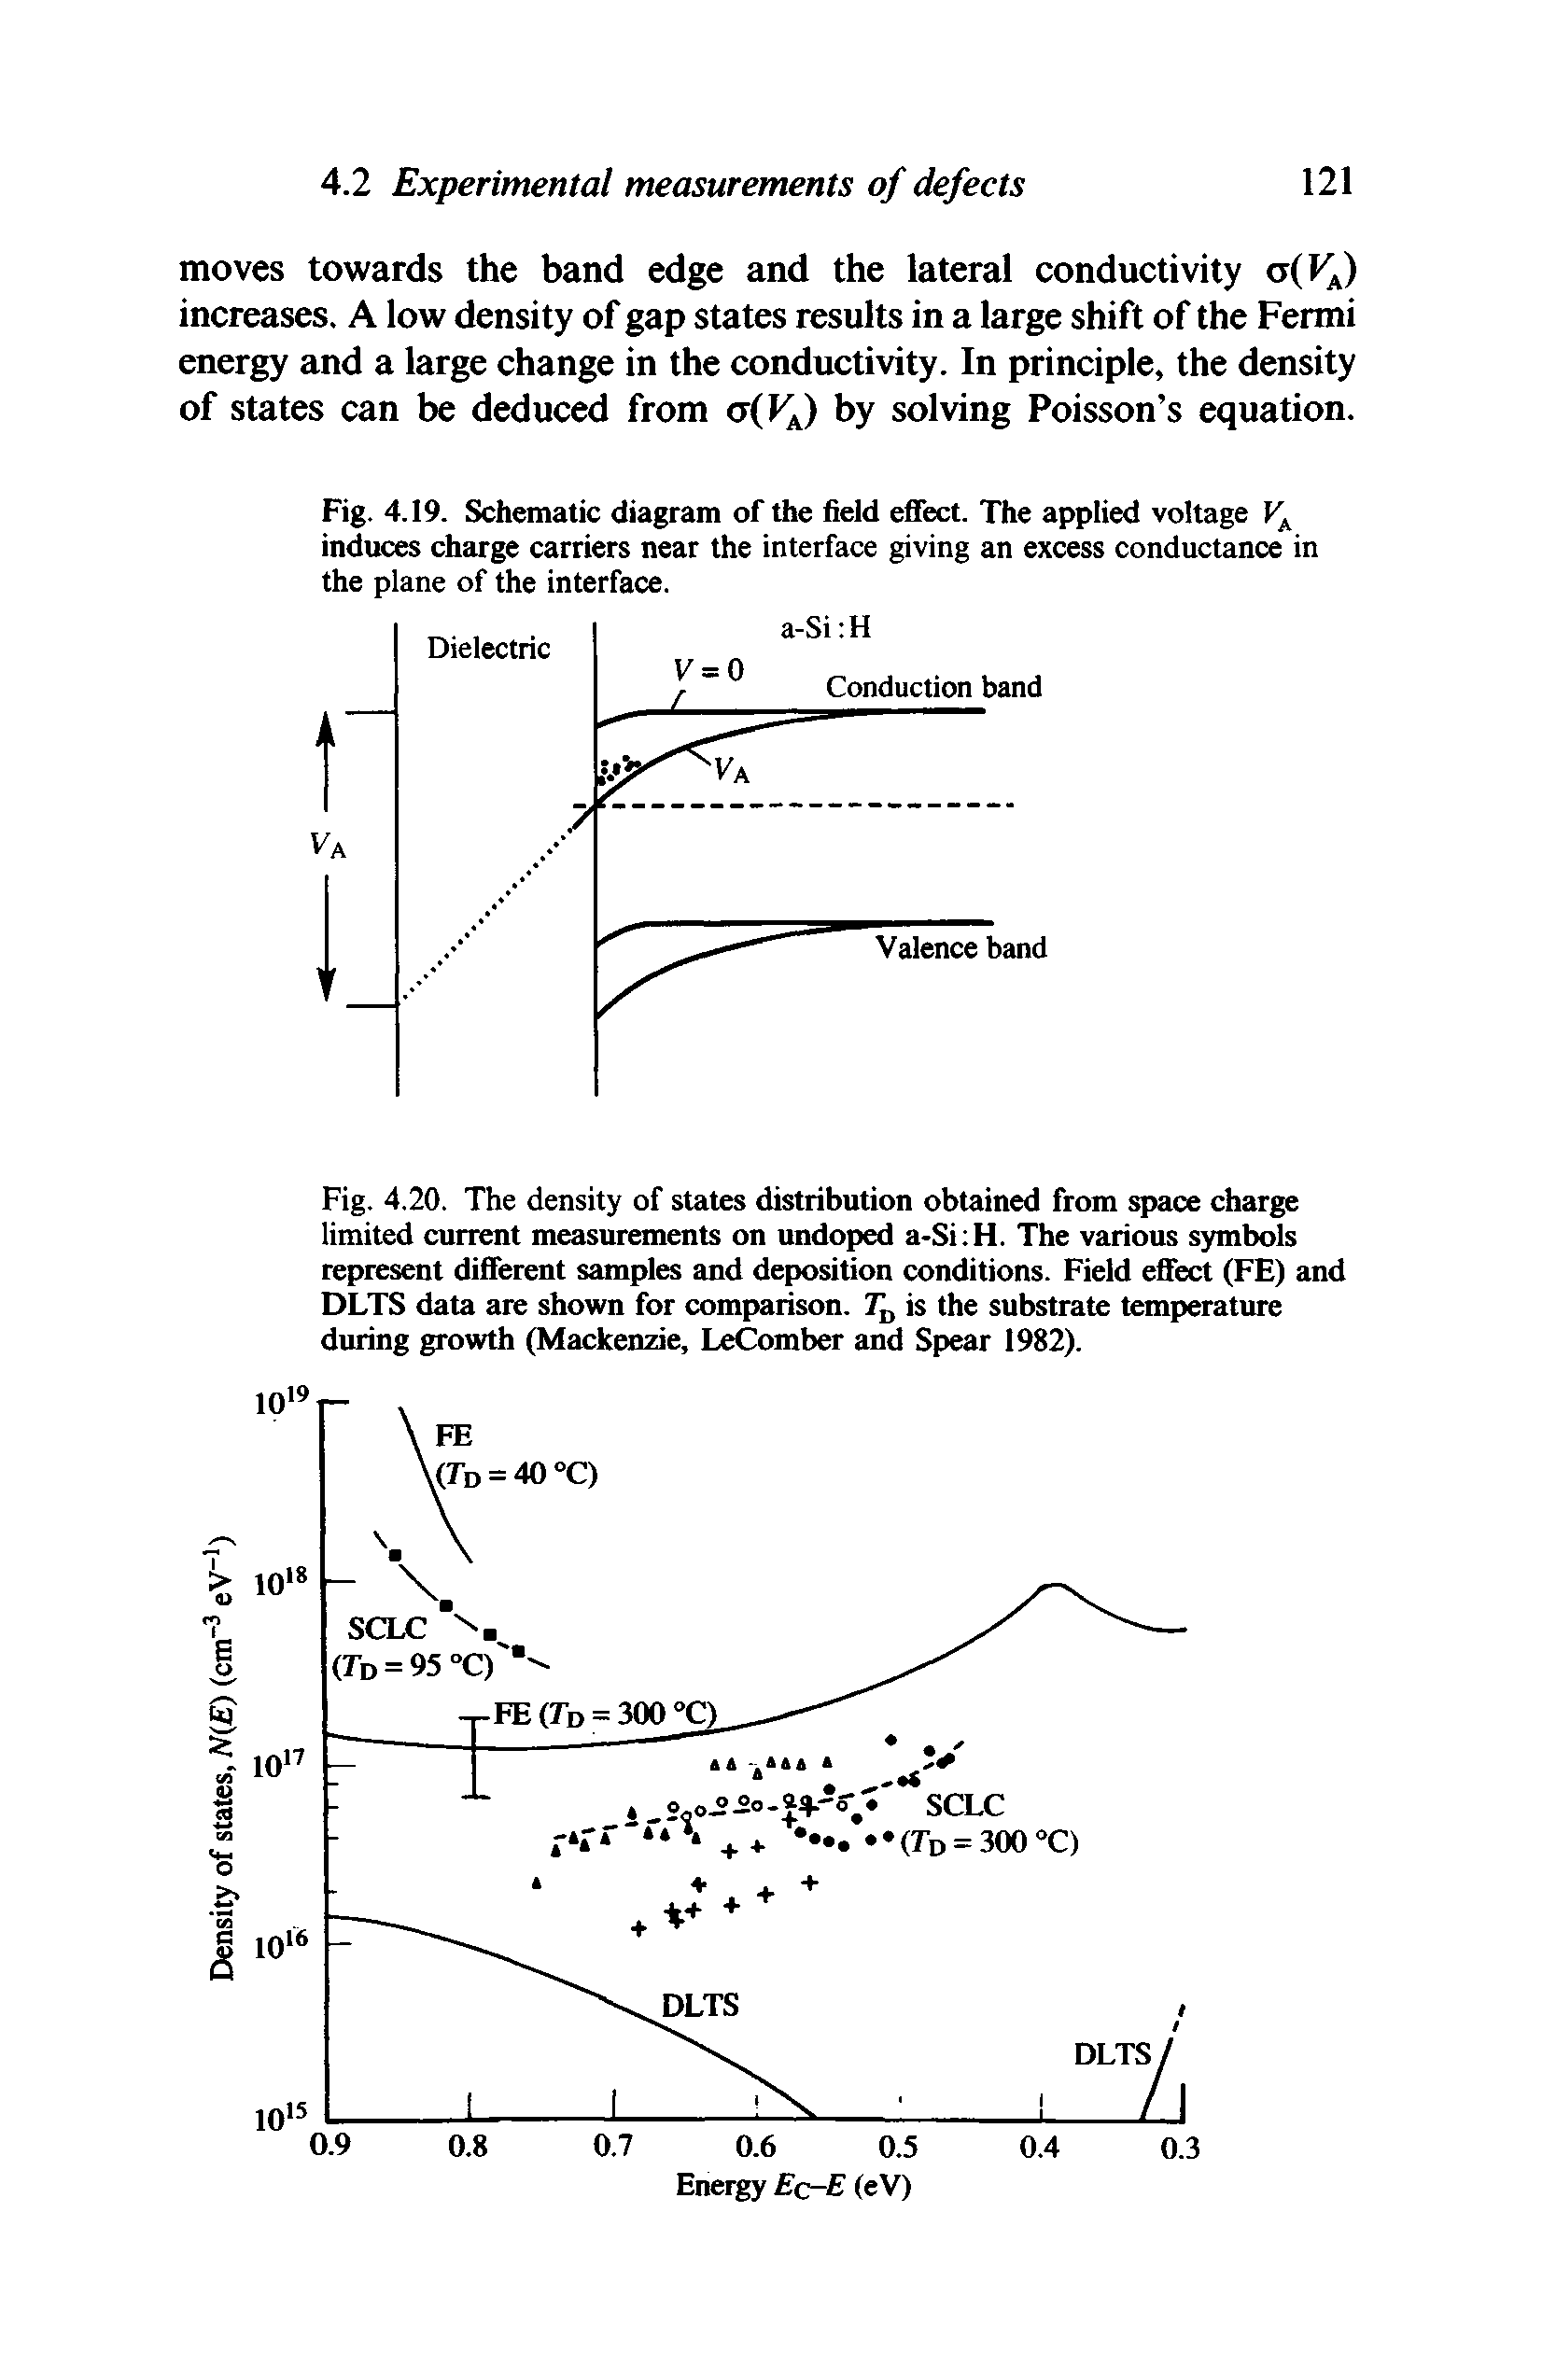 Fig. 4.20. The density of states distribution obtained from space charge limited current measurements on undoped a-Si H. The various symbols represent different samples and deposition conditions. Field efiect (FE) and DLTS data are shown for comparison. is the substrate temperature during growth (Mackenzie, LeComber and Spear 1982).